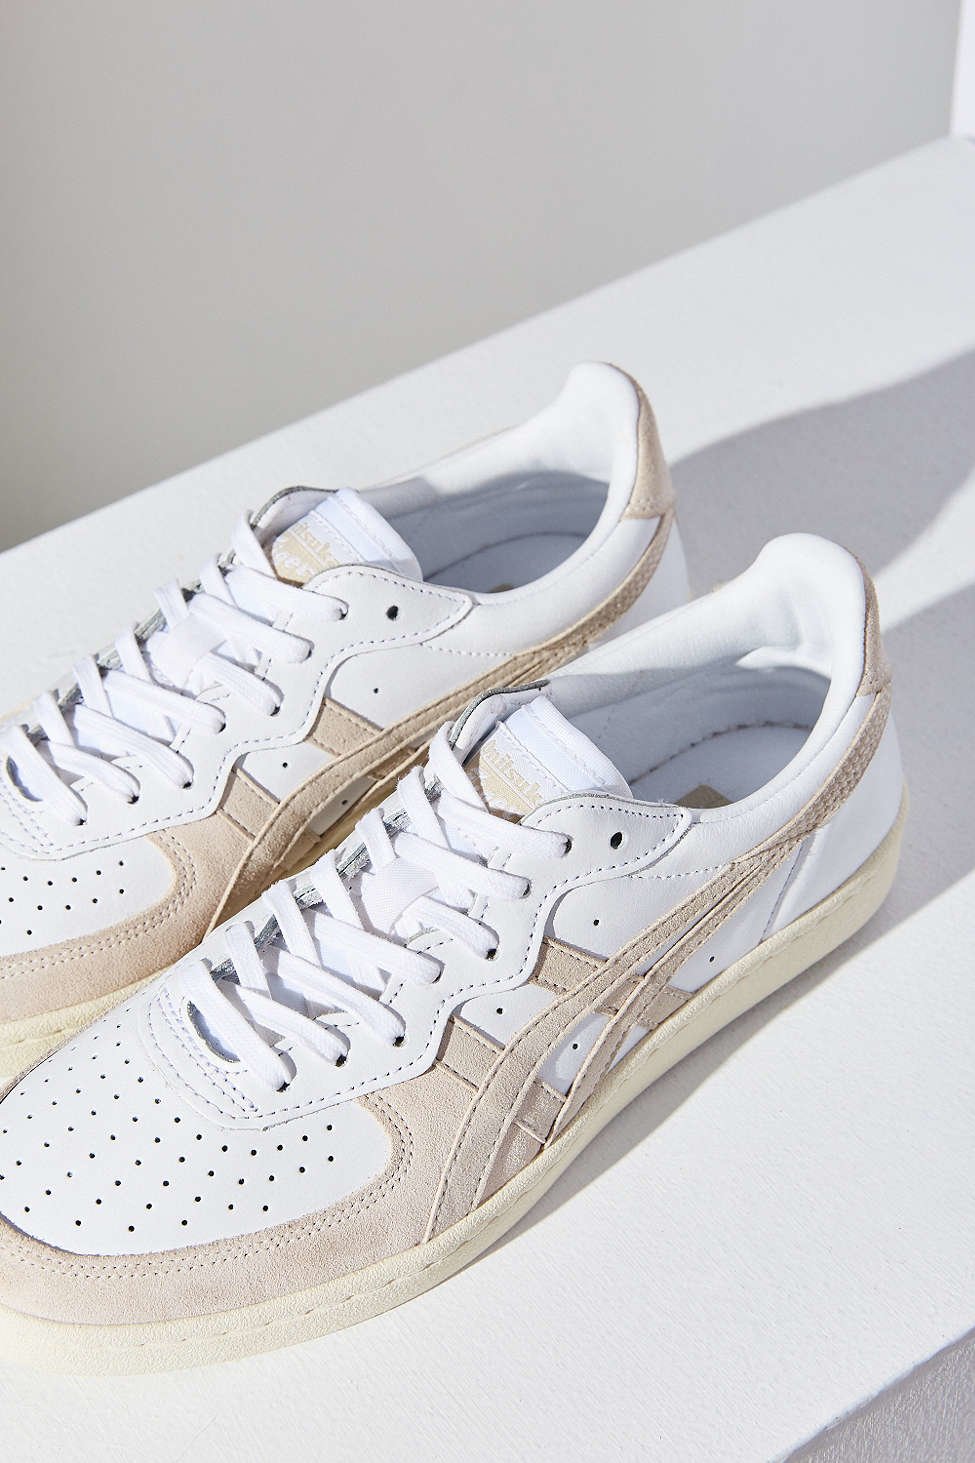 Asics Leather Onitsuka Tiger Gsm Sneaker in White - Lyst